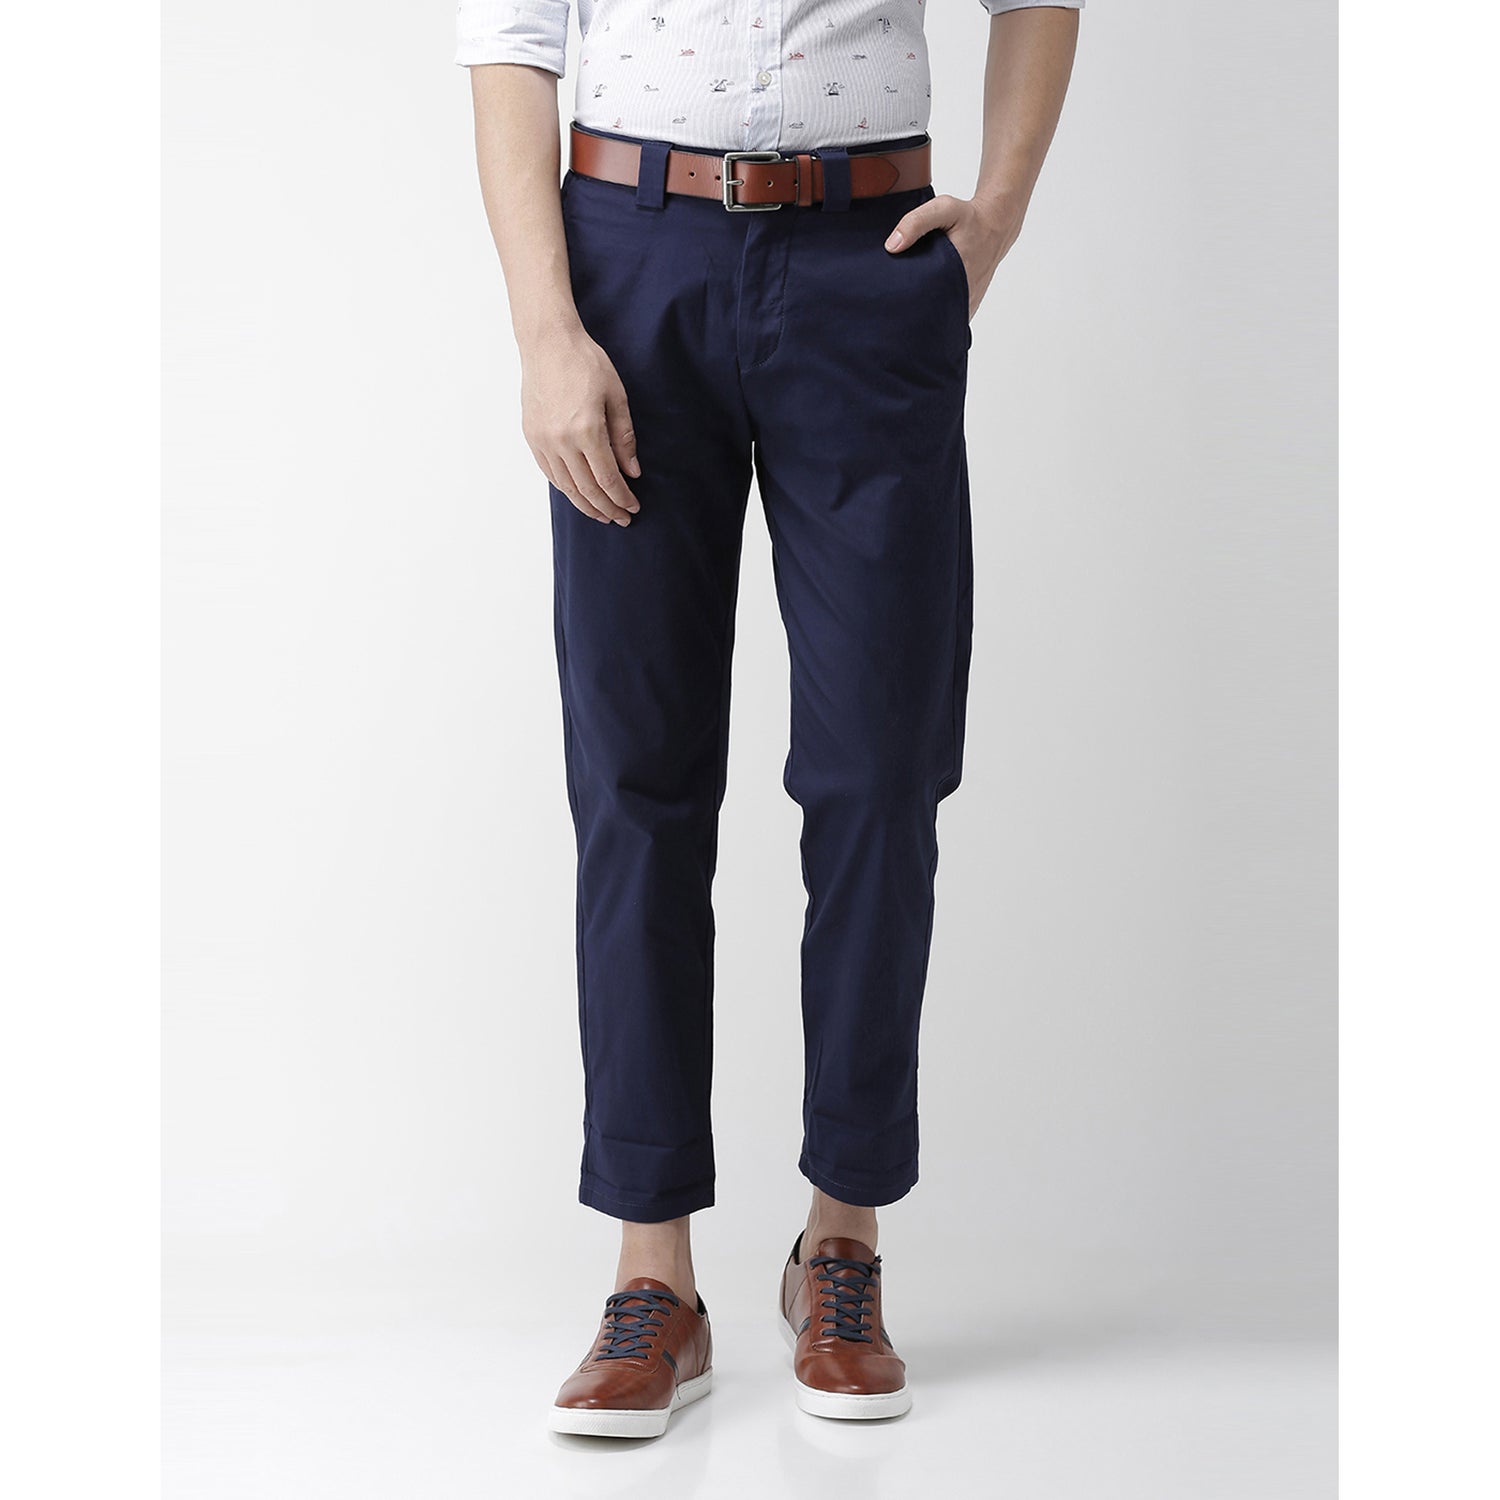 Navy Blue Regular Fit Solid Chinos (NORABO)